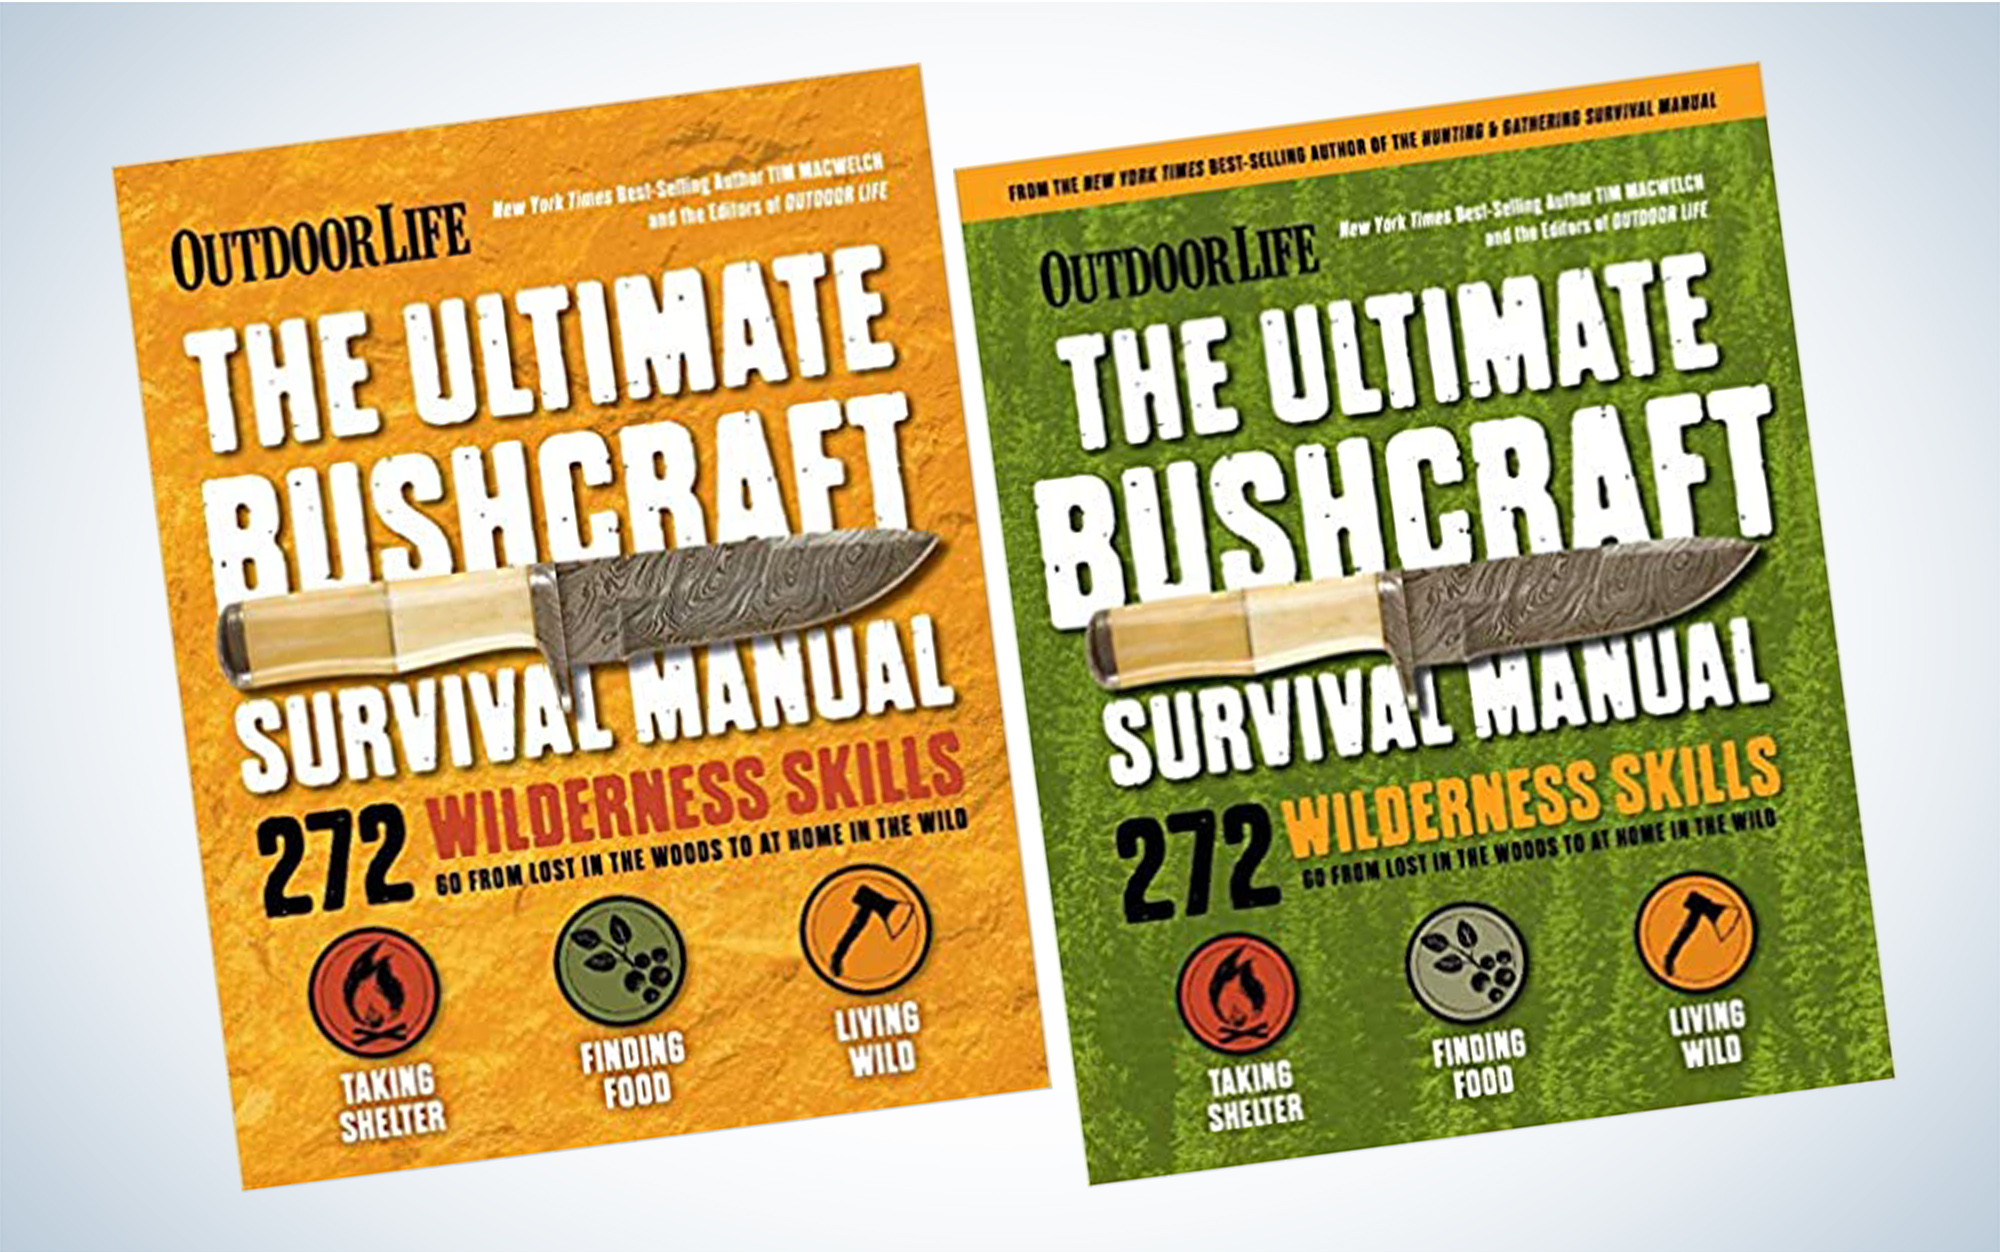 The Ultimate Bushcraft Survival Manual Is On Sale